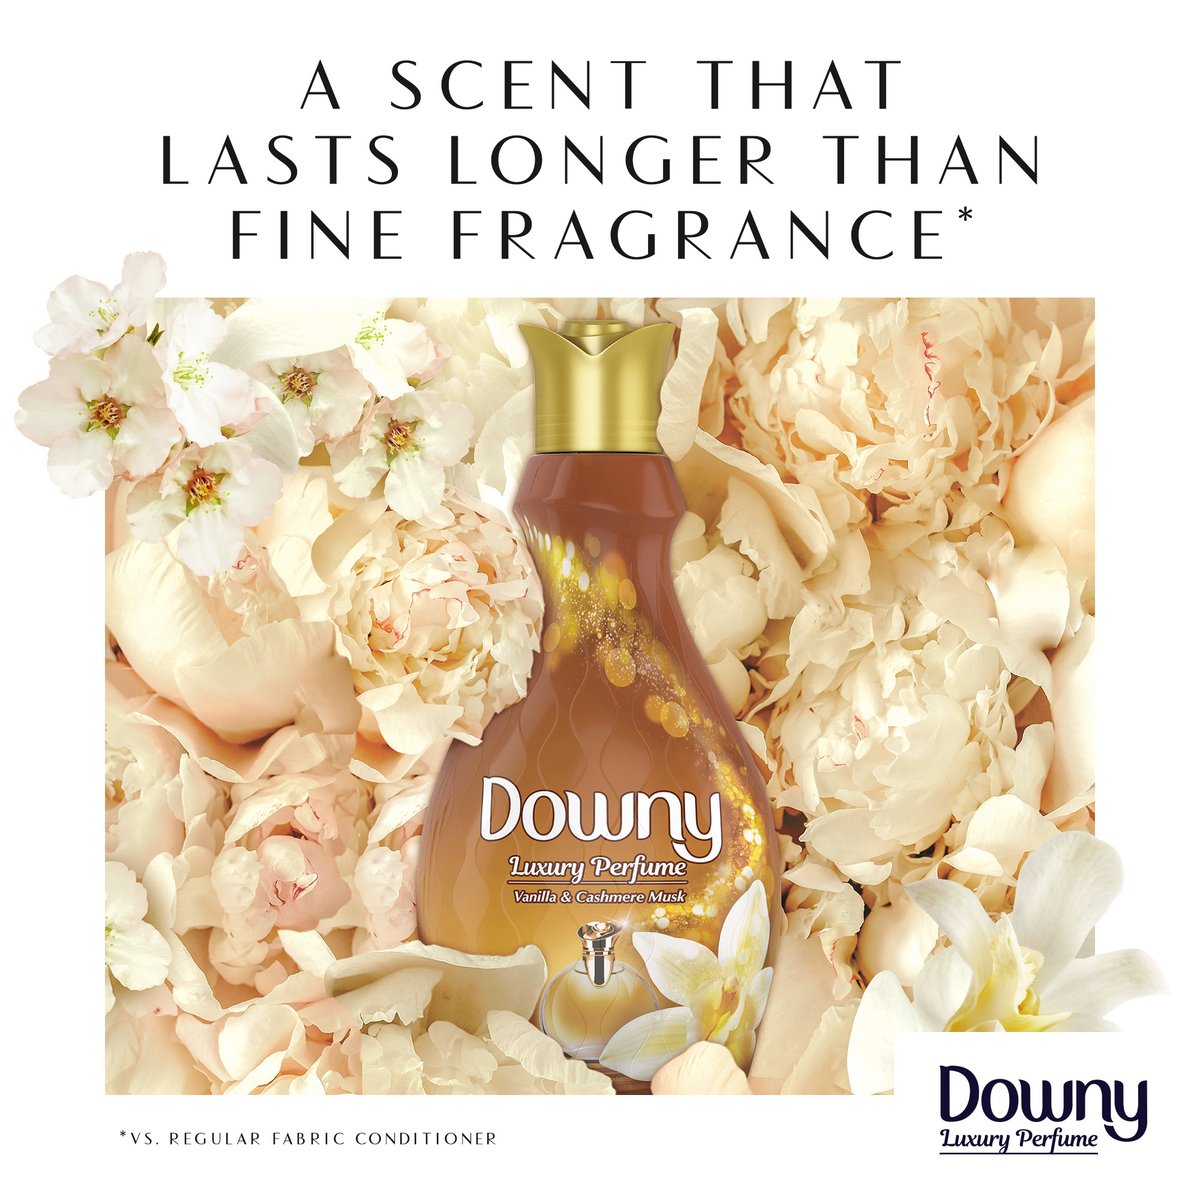 Downy Luxury Perfume Concentrate Vanilla & Cashmere Musk Fabric Softener 3 x 1.38 Litres